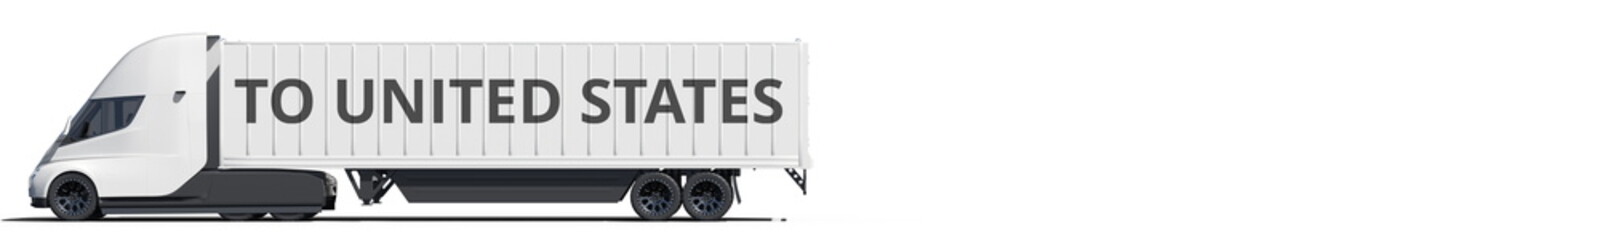 TO UNITED STATES text on the modern electric white trailer truck, 3d rendering